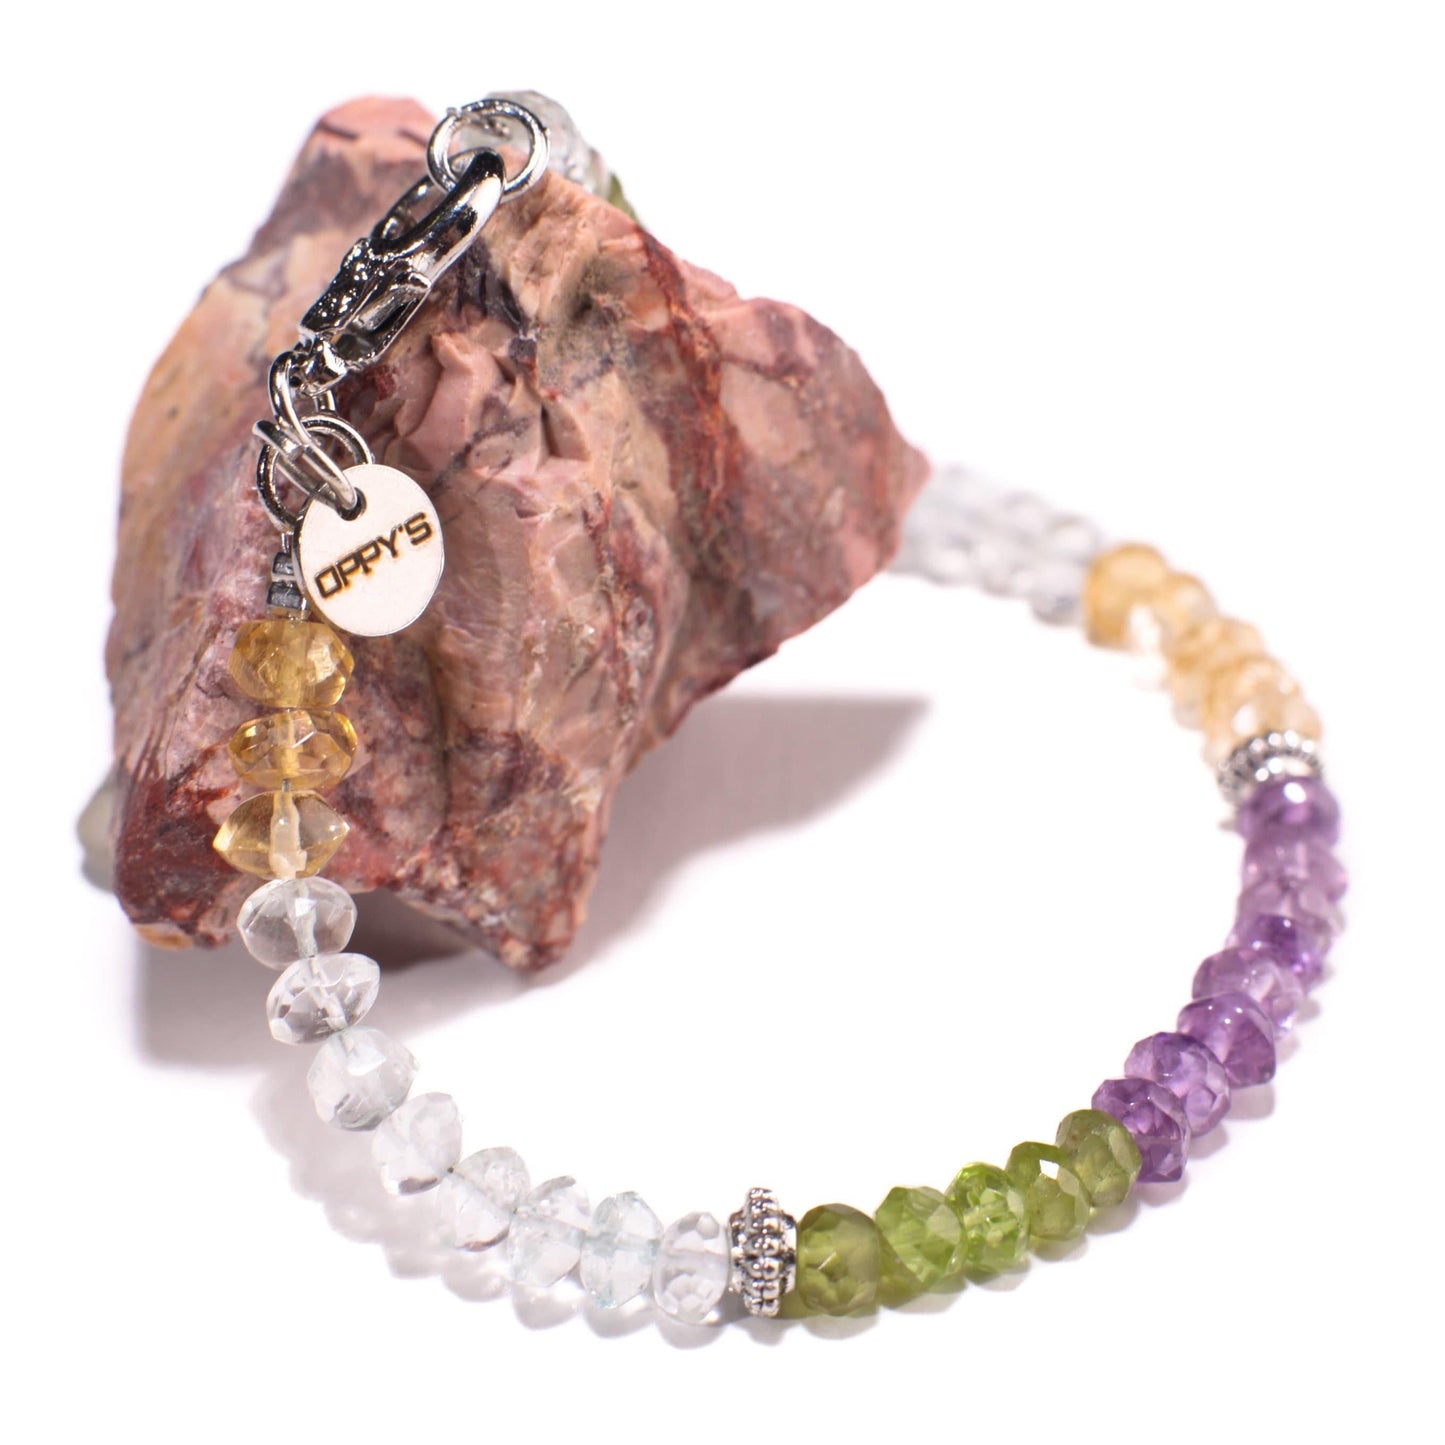 Multi Gemstones Peridot, Citrine, Amethyst, Aquamarine Faceted Rondelle 5.5-6mm Bracelet in Sterling Silver or Gold Filled Clasp